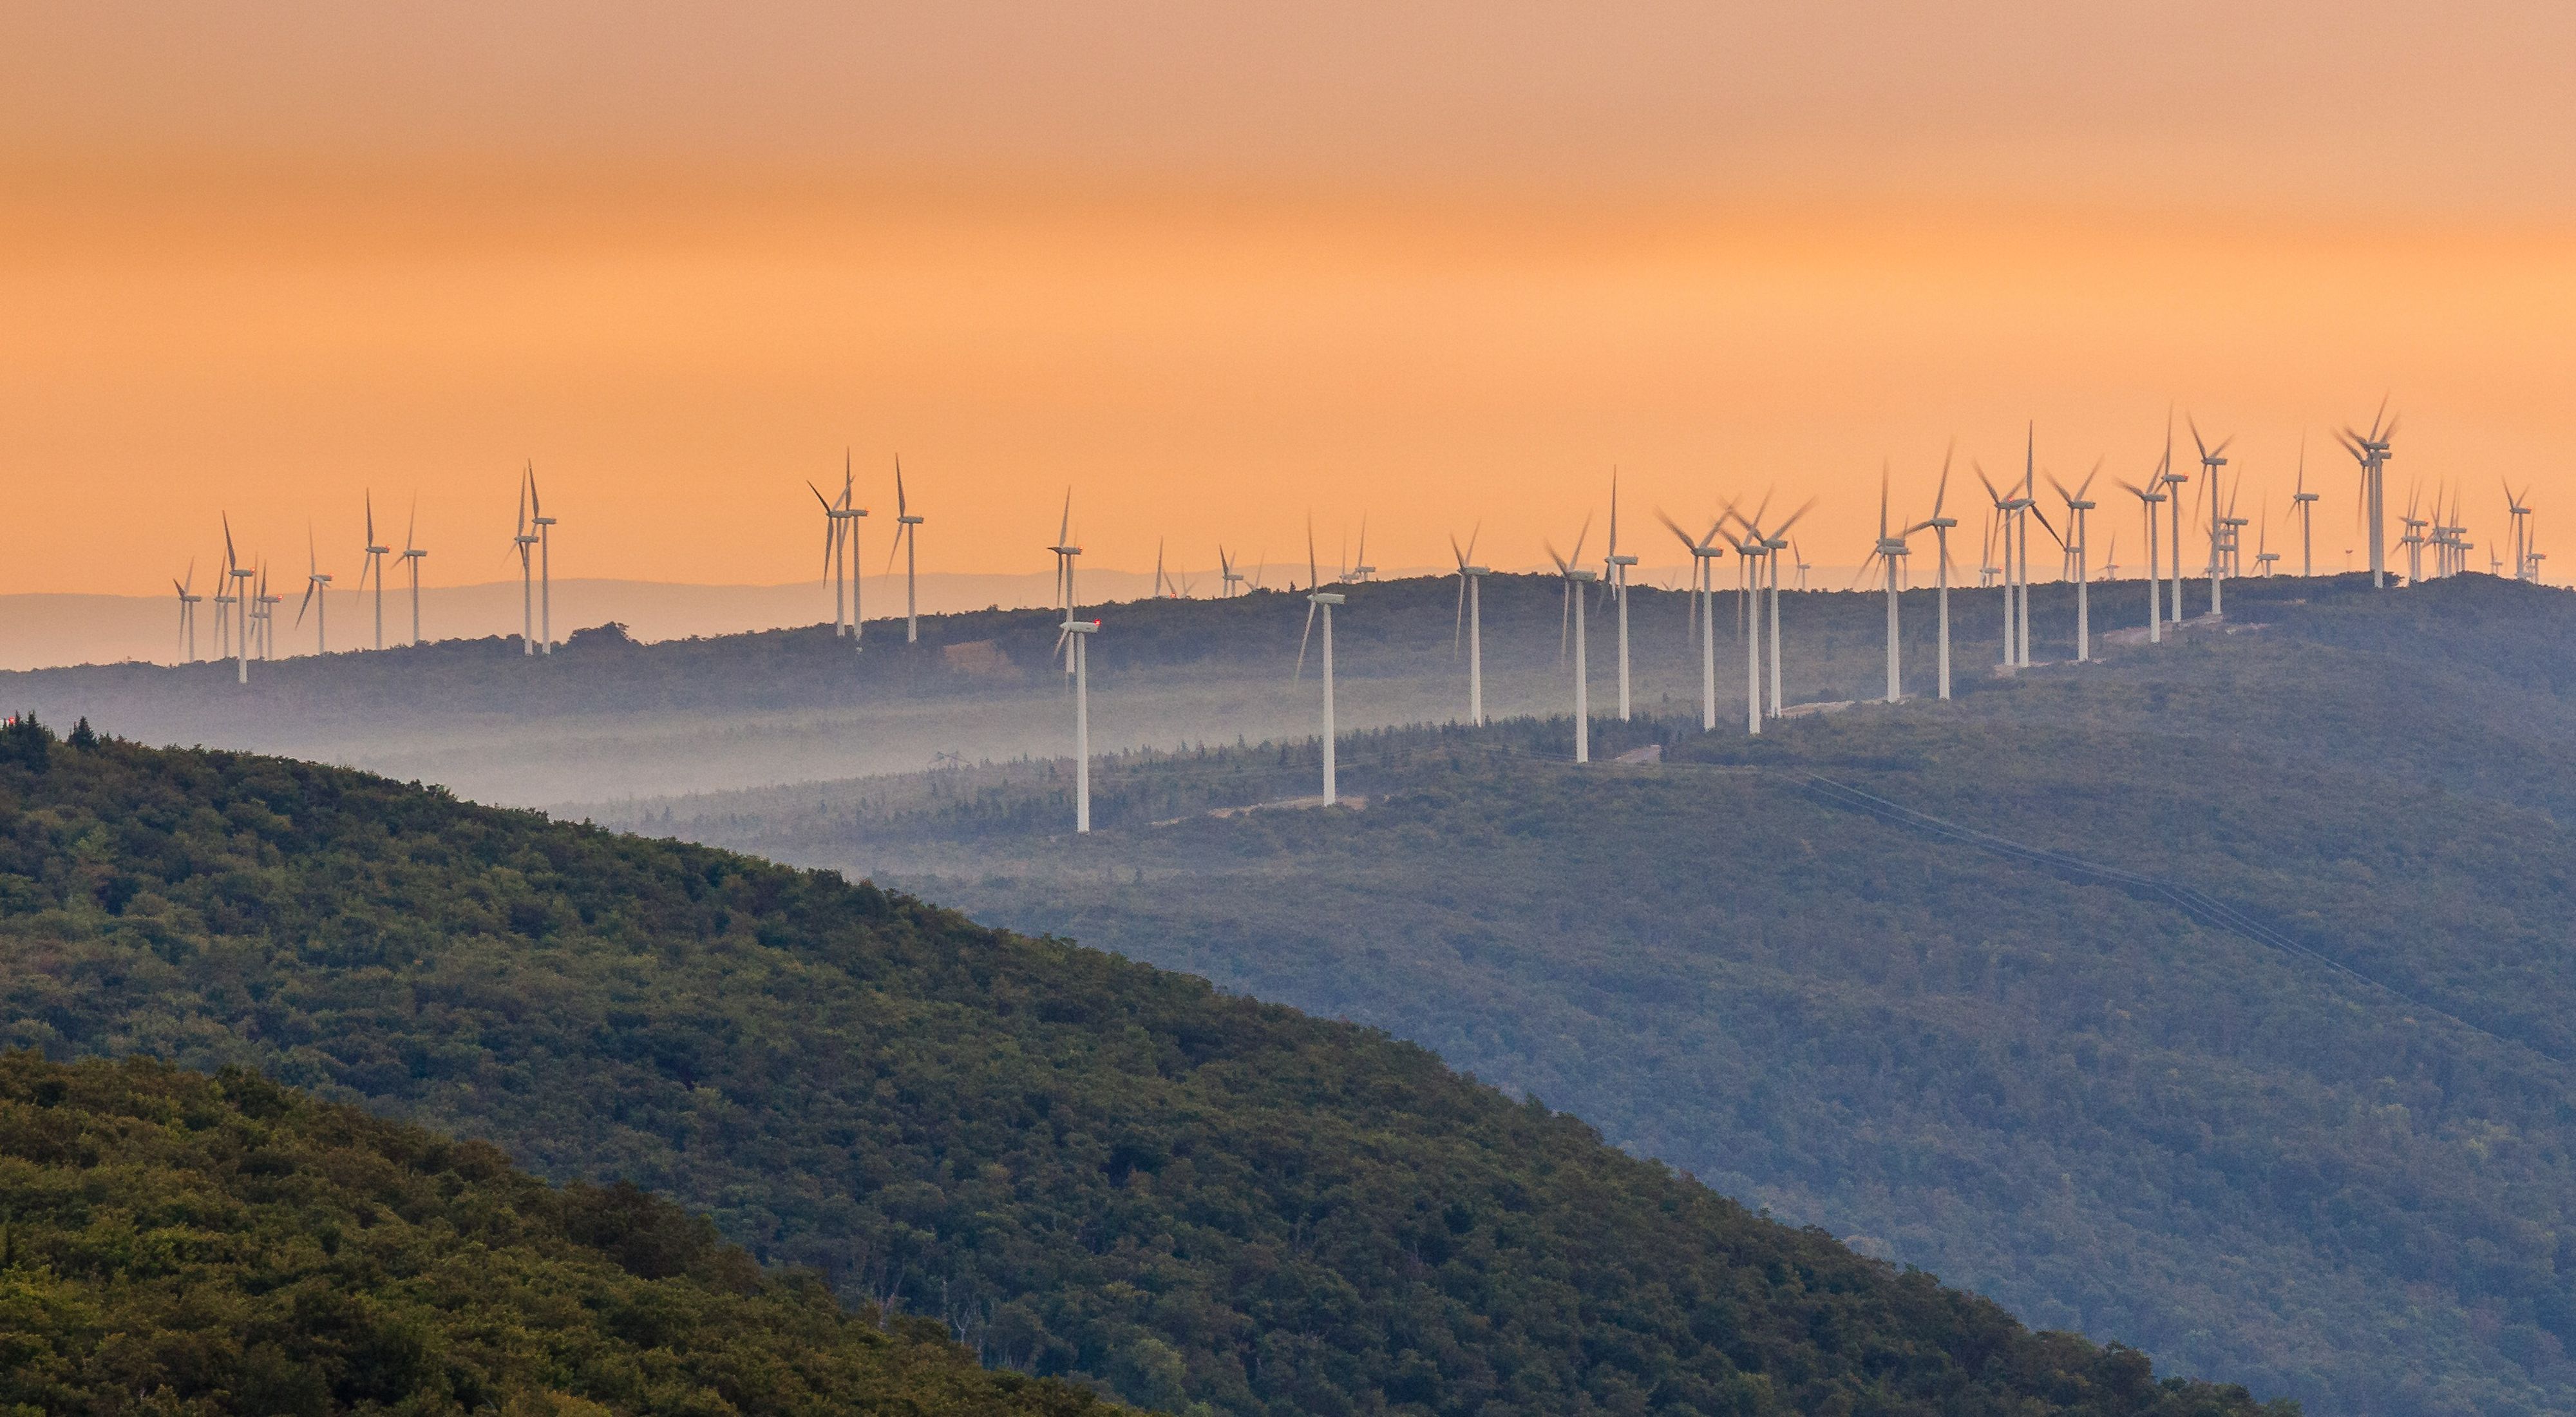 Wind turbines in the Appalachian mountains of West Virginia point toward a more sustainable future